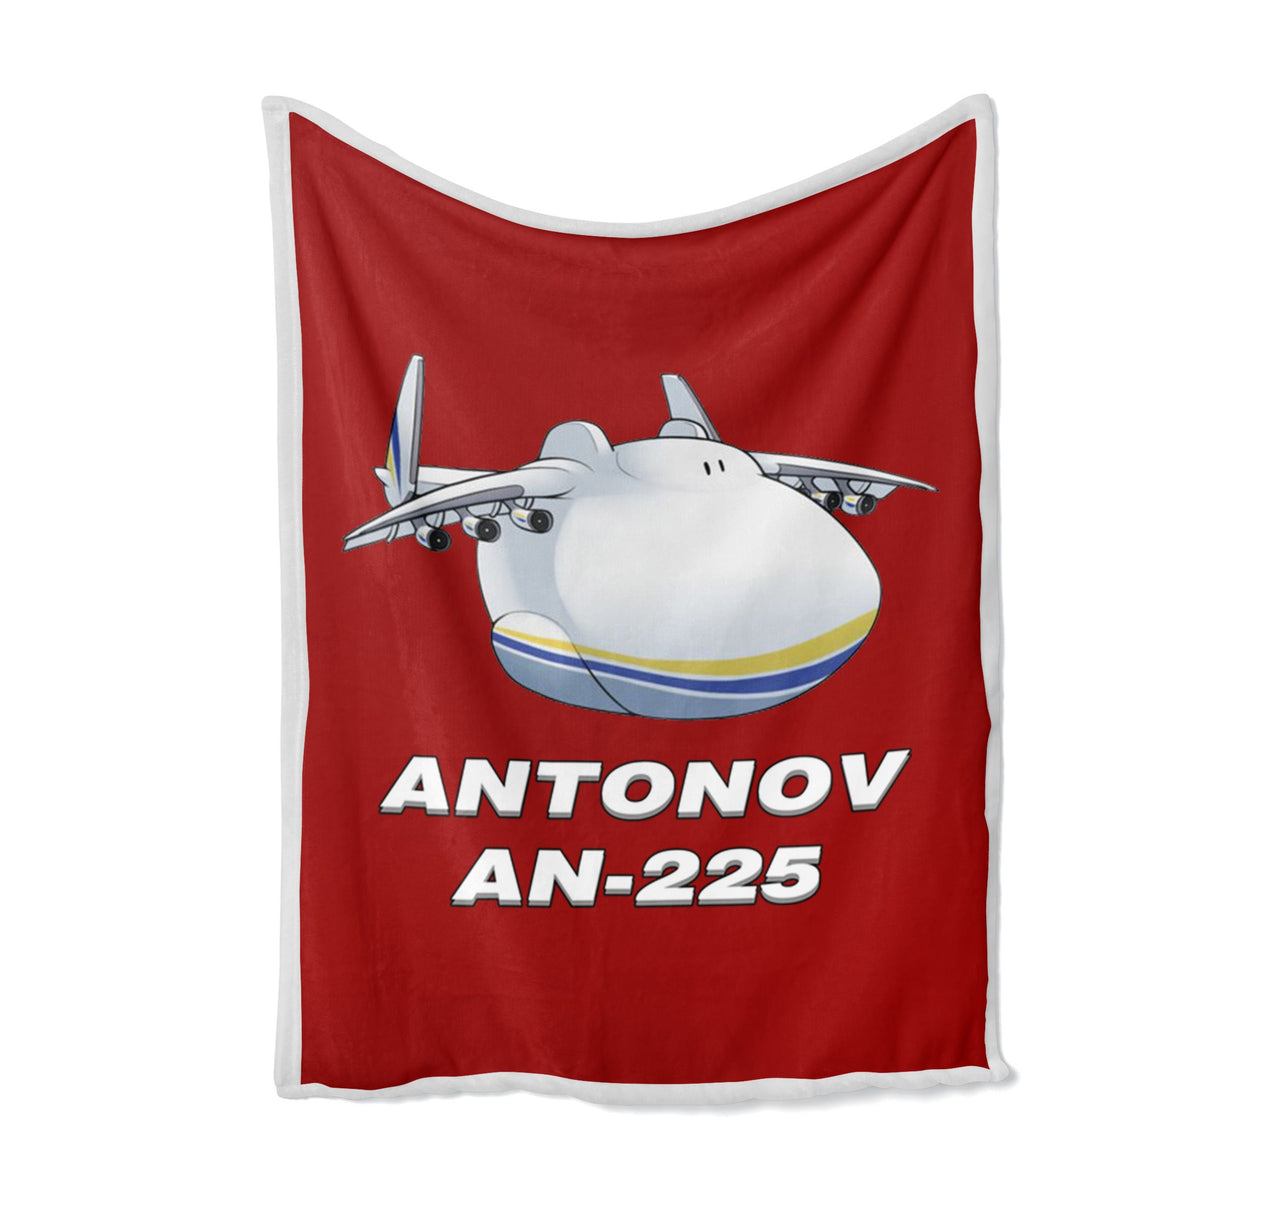 Antonov AN-225 (21) Designed Bed Blankets & Covers